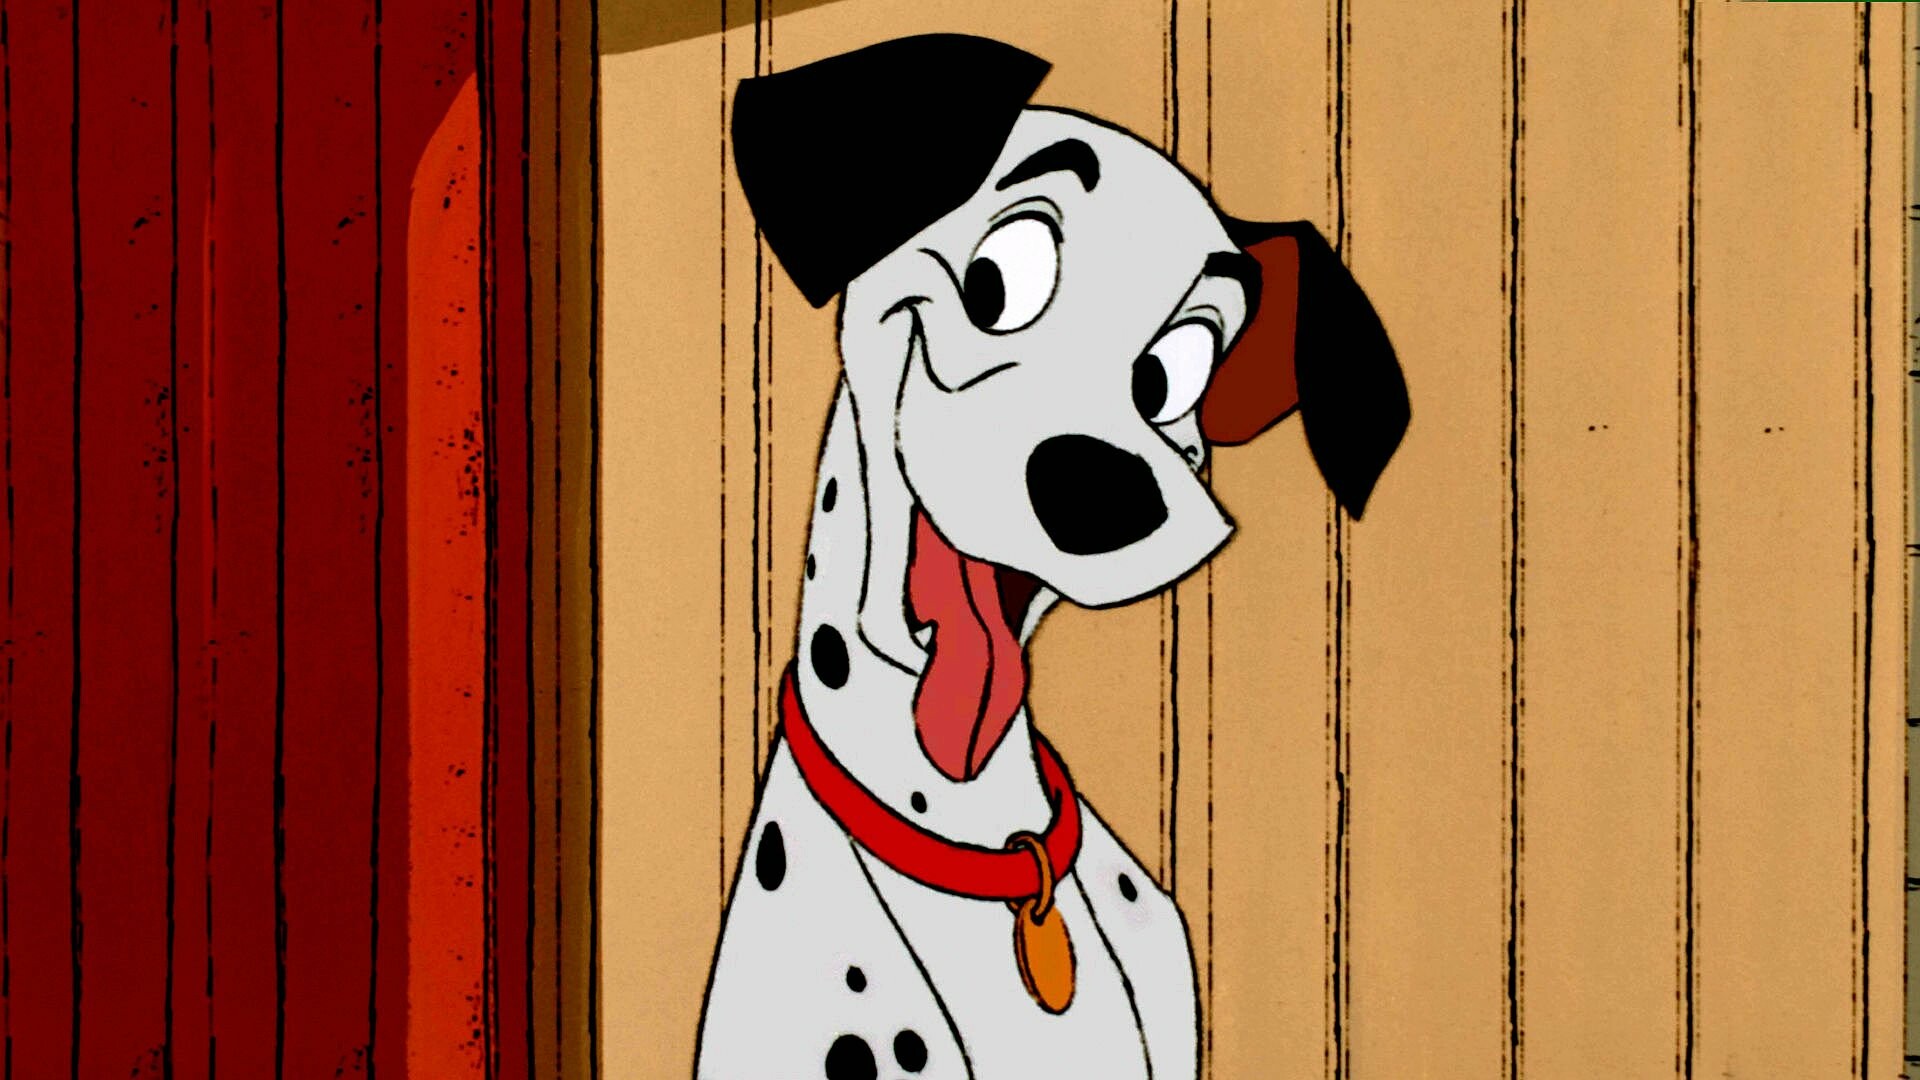 One Hundred and One Dalmatians: Comedy, Adventure, Family, Anita Dearly and Roger Radcliffe's dog. 1920x1080 Full HD Wallpaper.